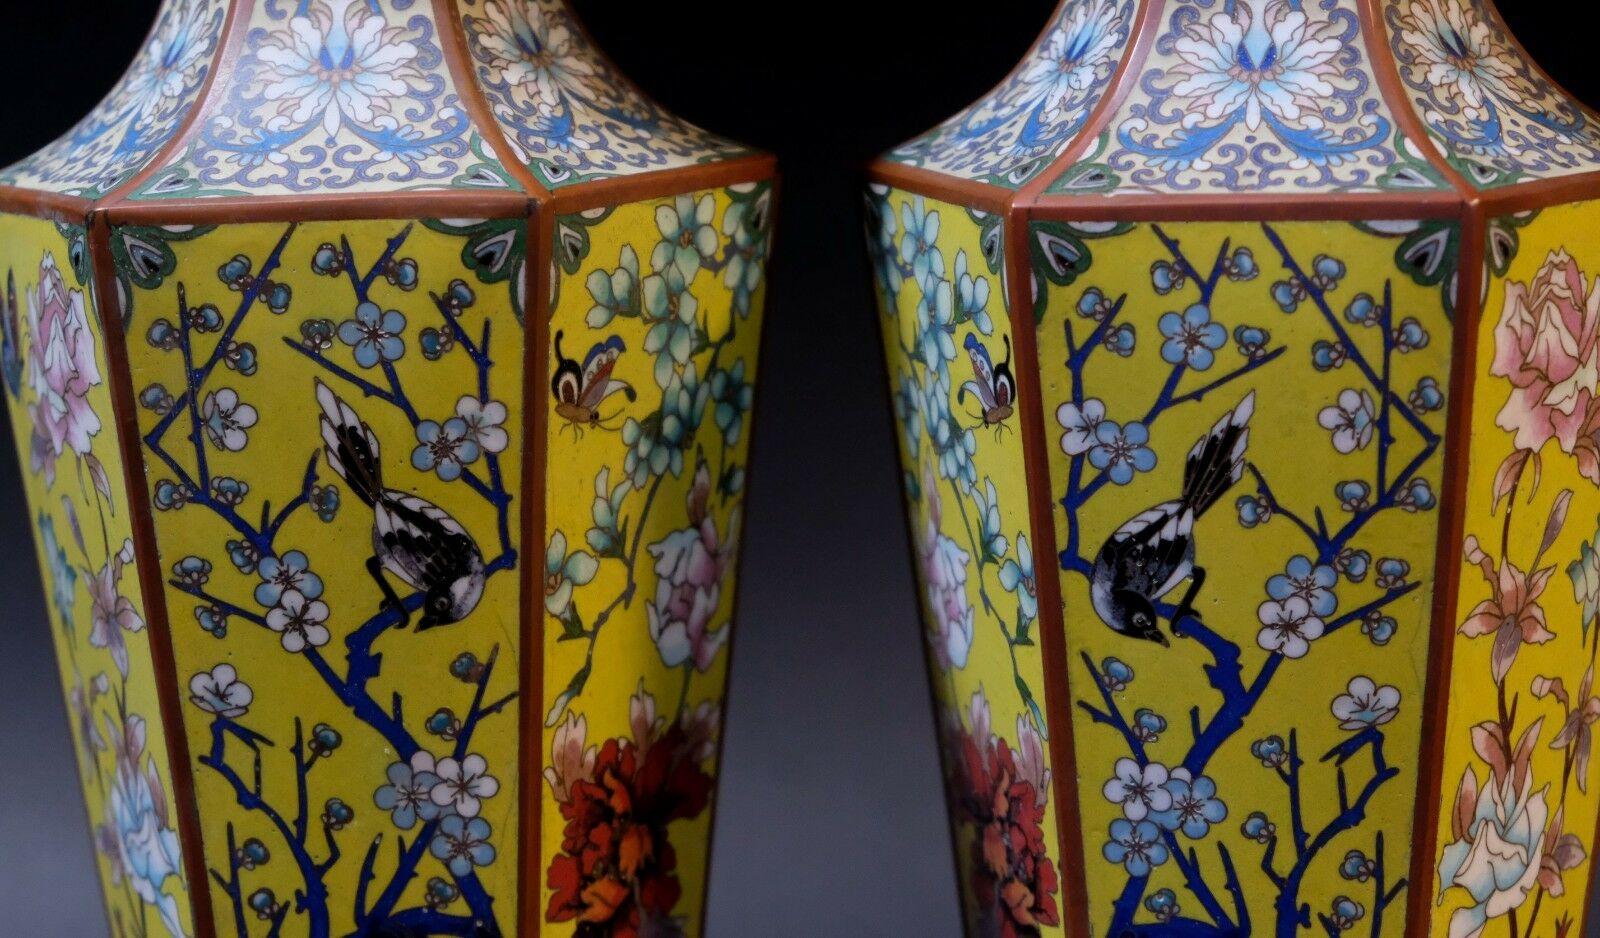 Matching Pair of Pair of French Victorian Cloisonné Vases, 19th Century For Sale 2